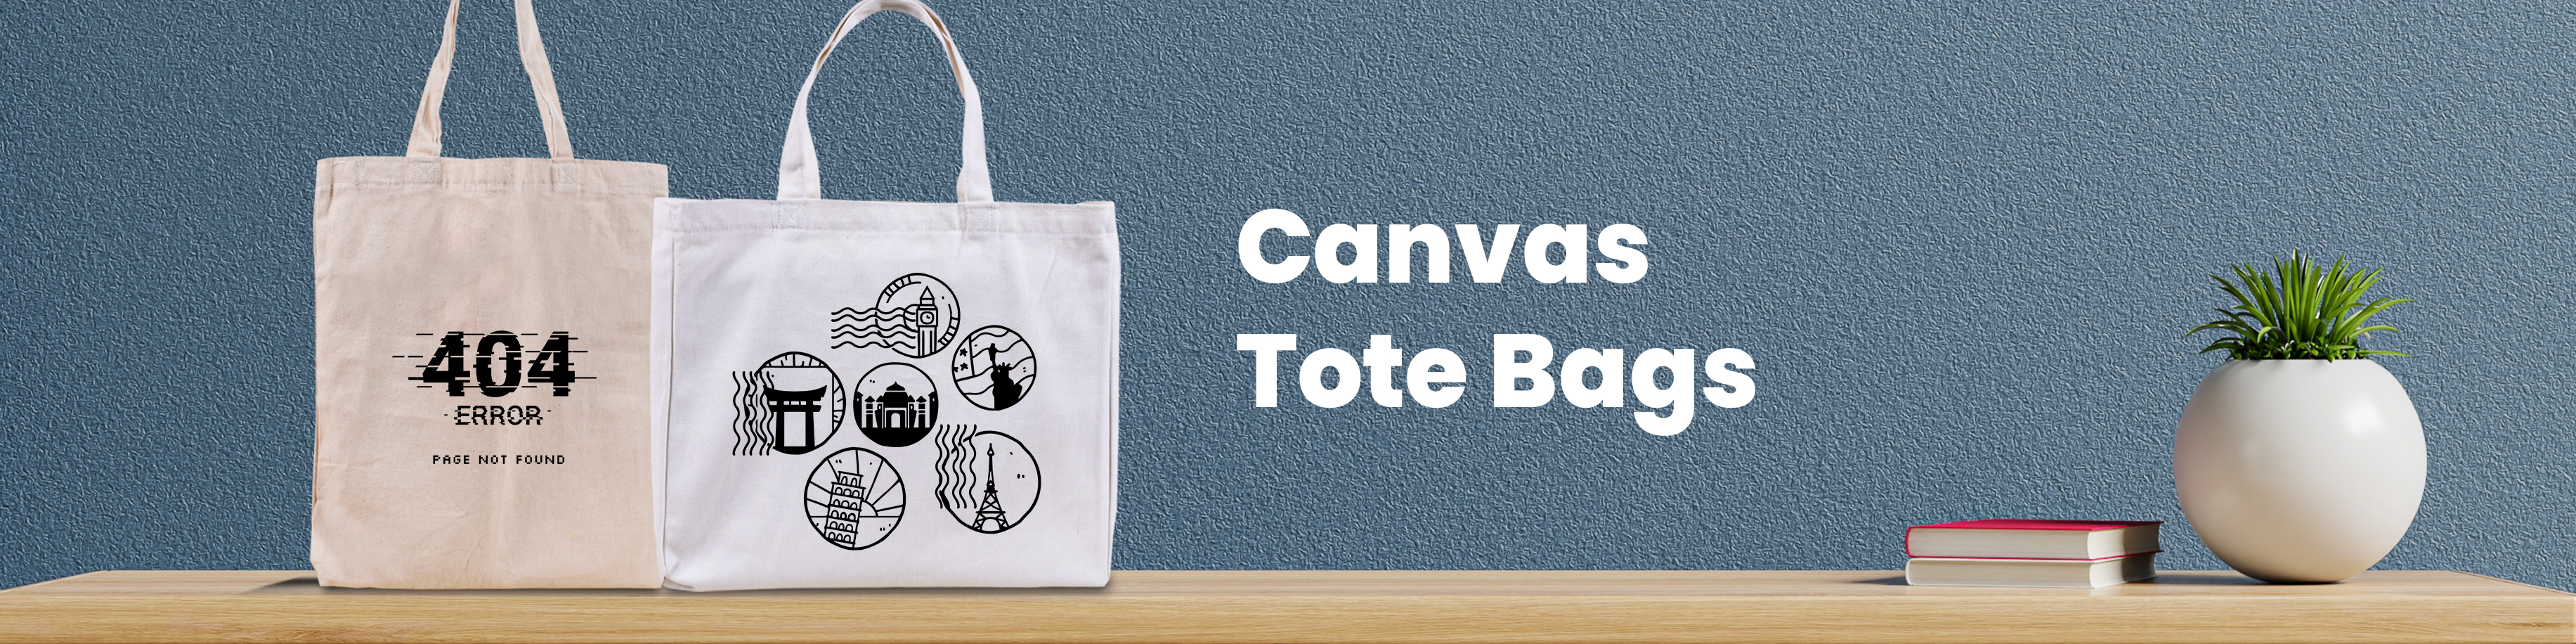 Two tote bags stand next to each other on a wooden surface against a blue background. One is tall and made of raw canvas, another is wide and of white canvas. Both have designs printed in black. There is a small potted plant and two small books nearby.